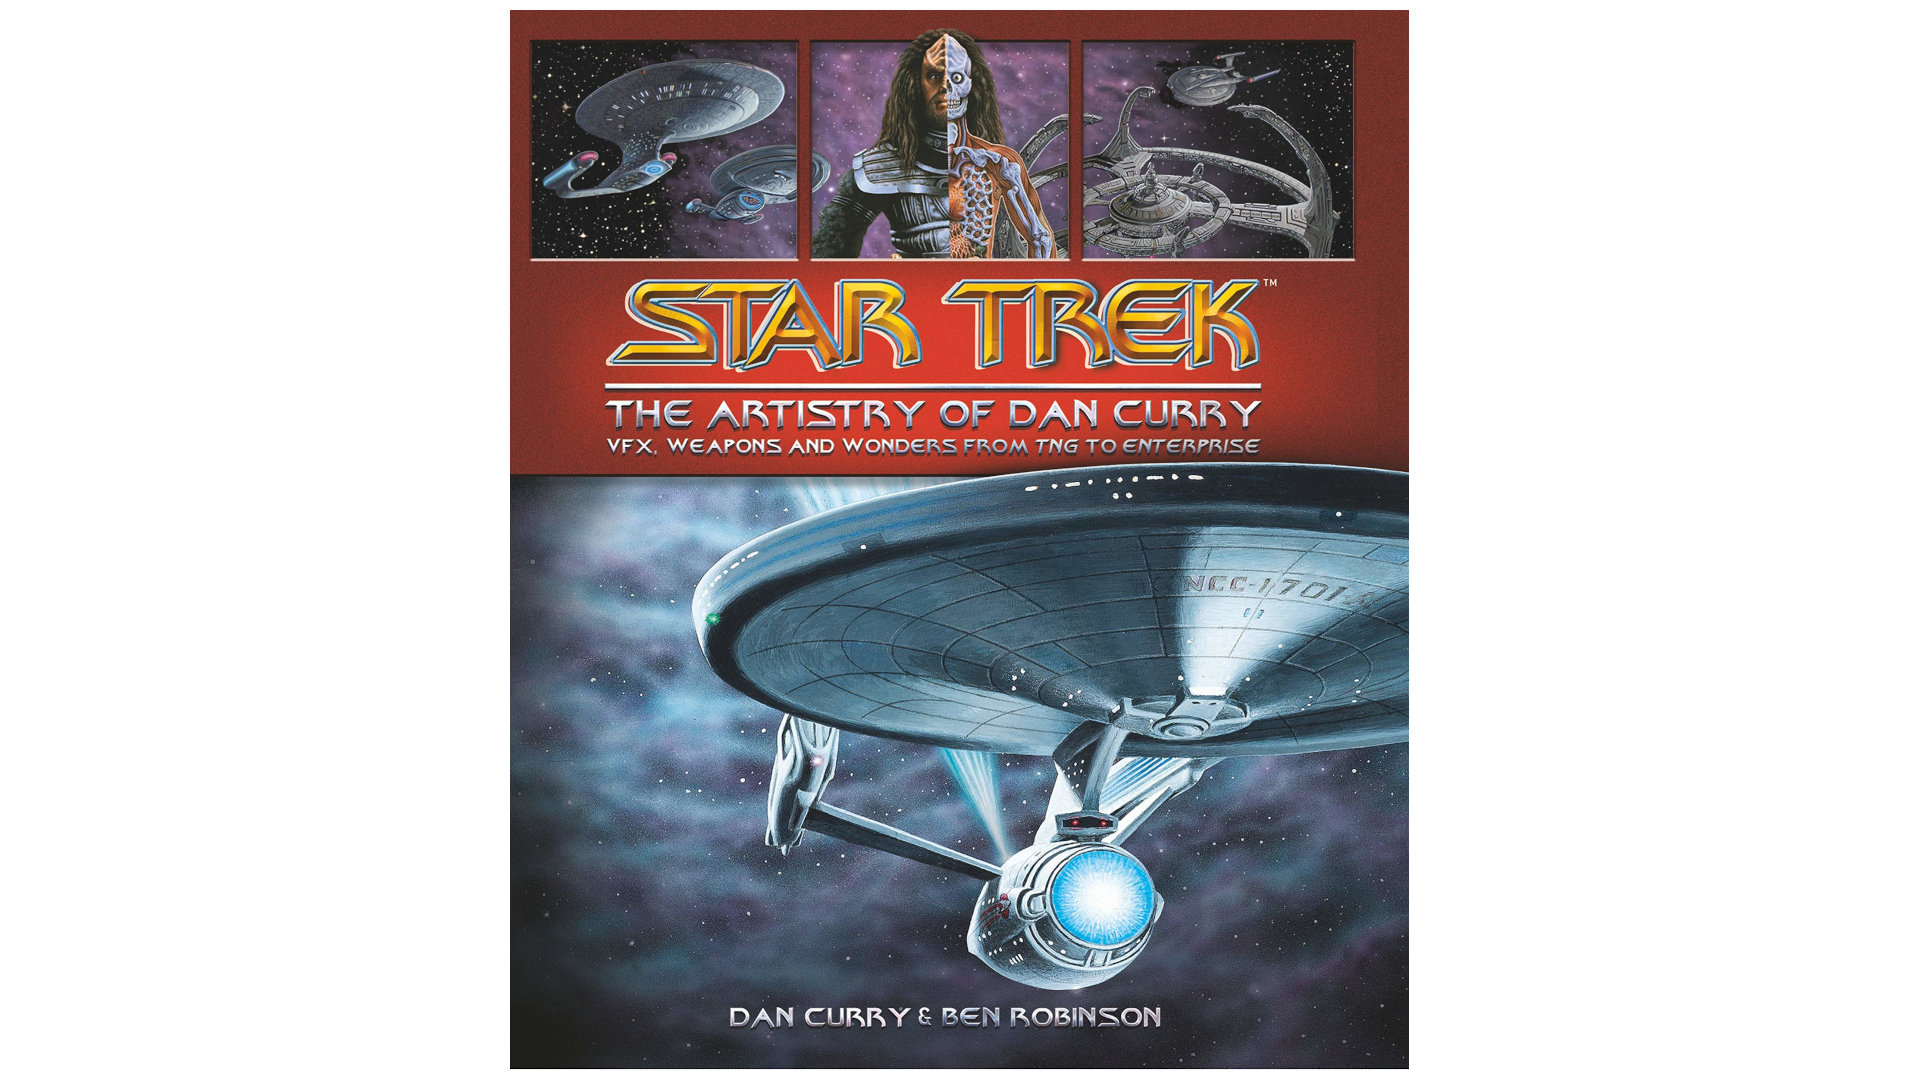 “Star Trek: The Artistry of Dan Curry” by Dan Curry and Ben Robinson (Titan Books, 2020)